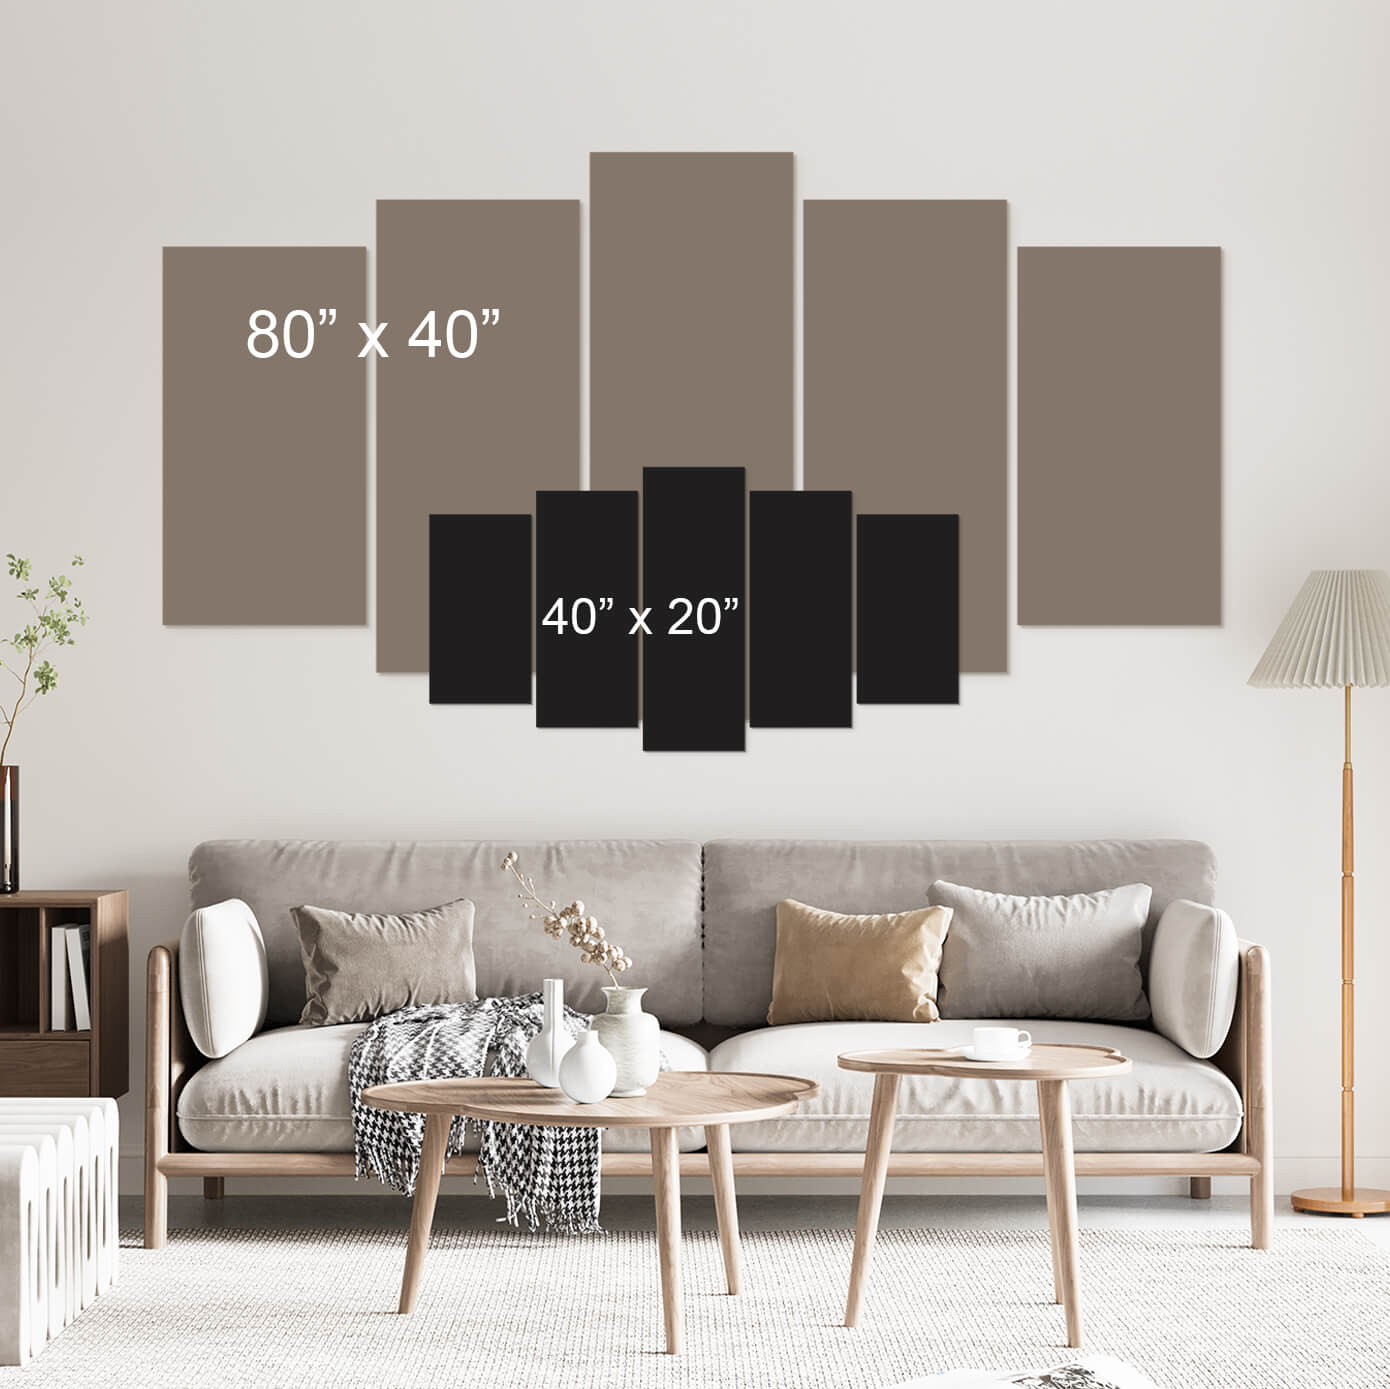 Stretched Canvas Places - New York And Sunrise-Tiptophomedecor